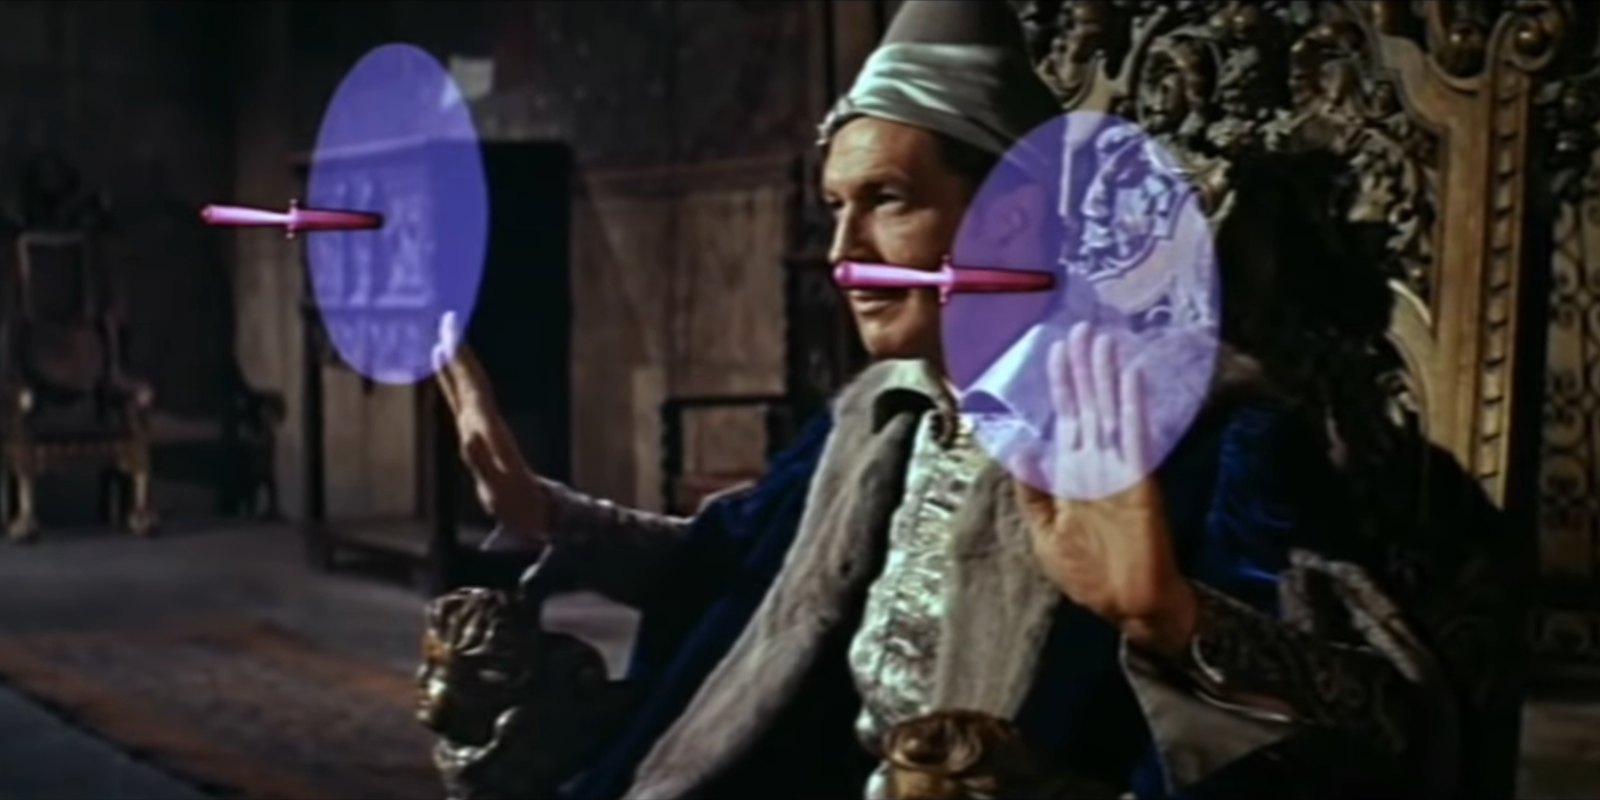 Vincent Price as Dr. Erasmus Craven using magic in The Raven